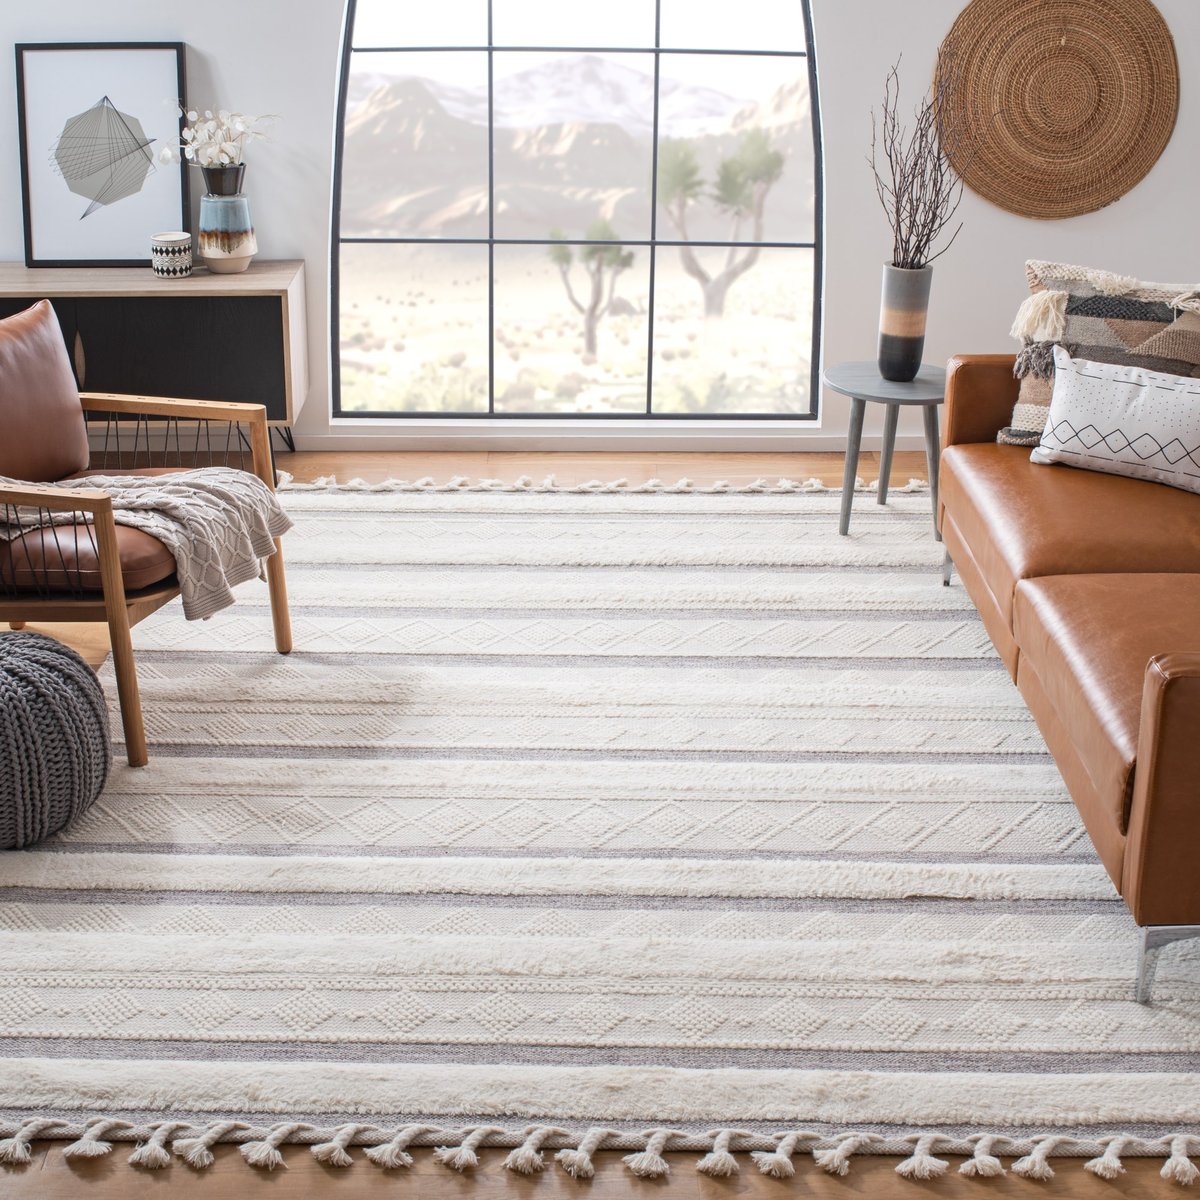 Are Rug Pads Necessary for Your Hardwood Floors? - Cameron the